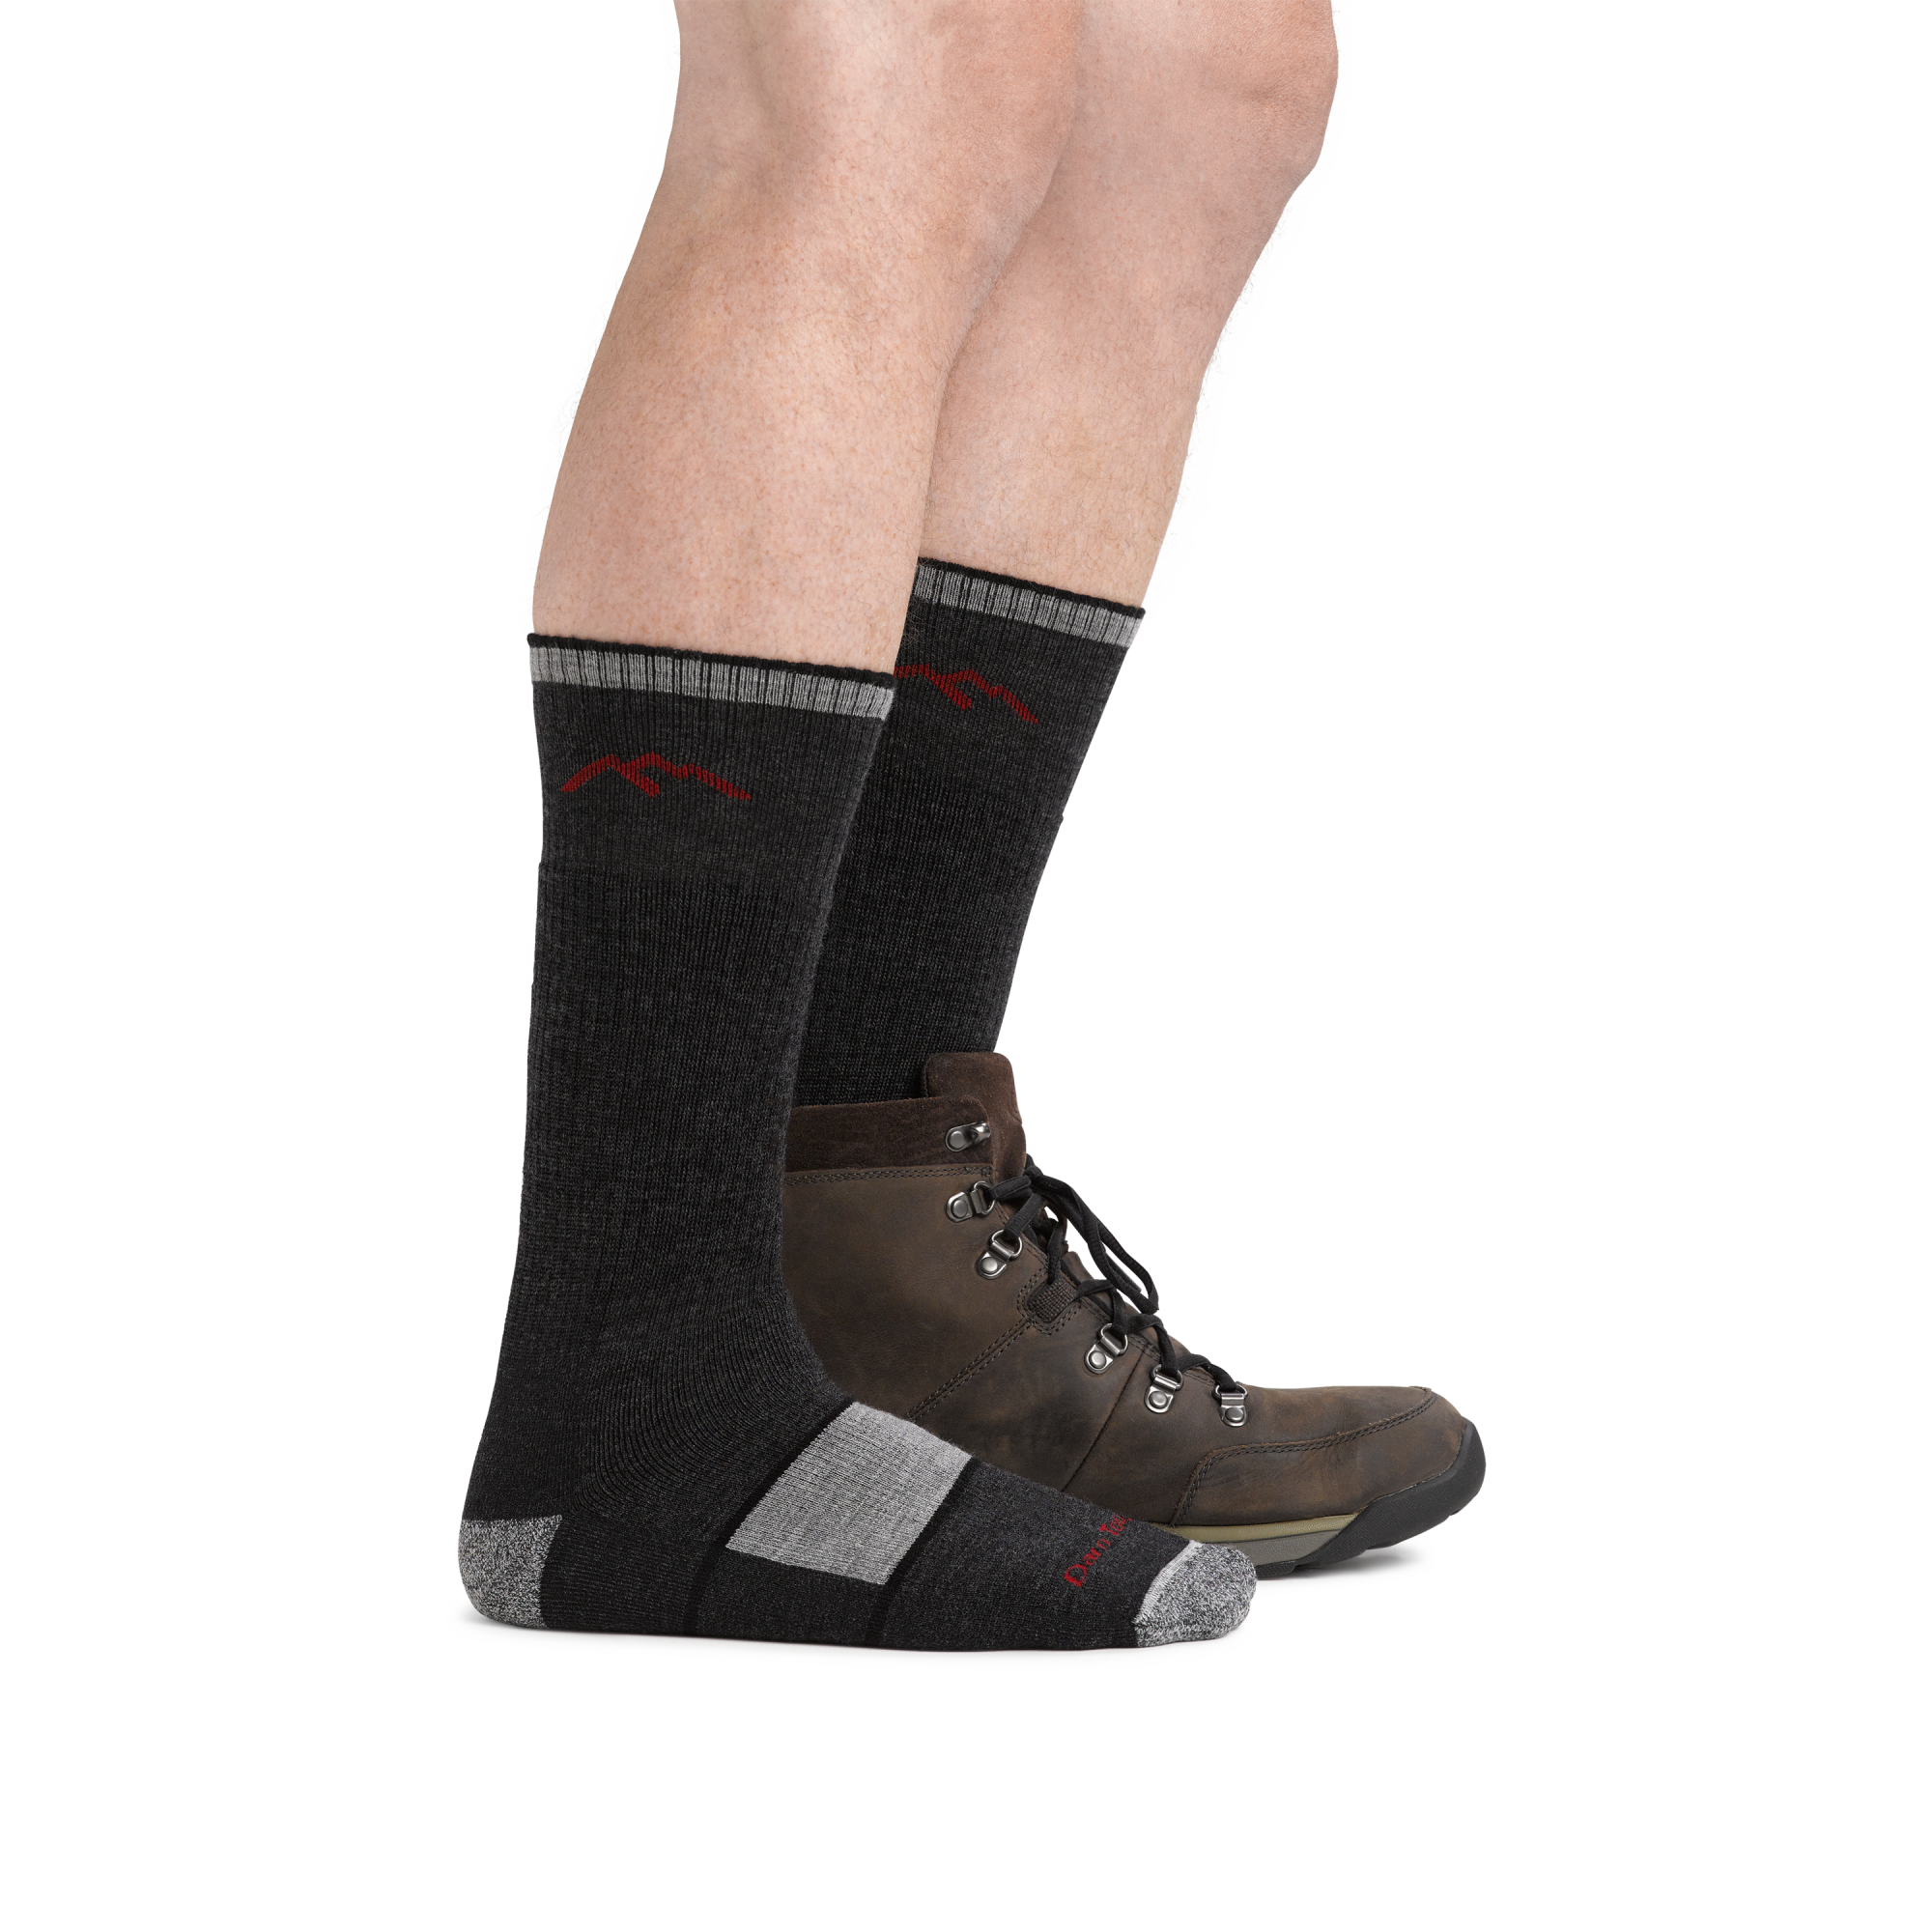 Man wearing Hiker Boot Midweight Hiking Socks with Full Cushion in black, with back foot also wearing a hiking boot